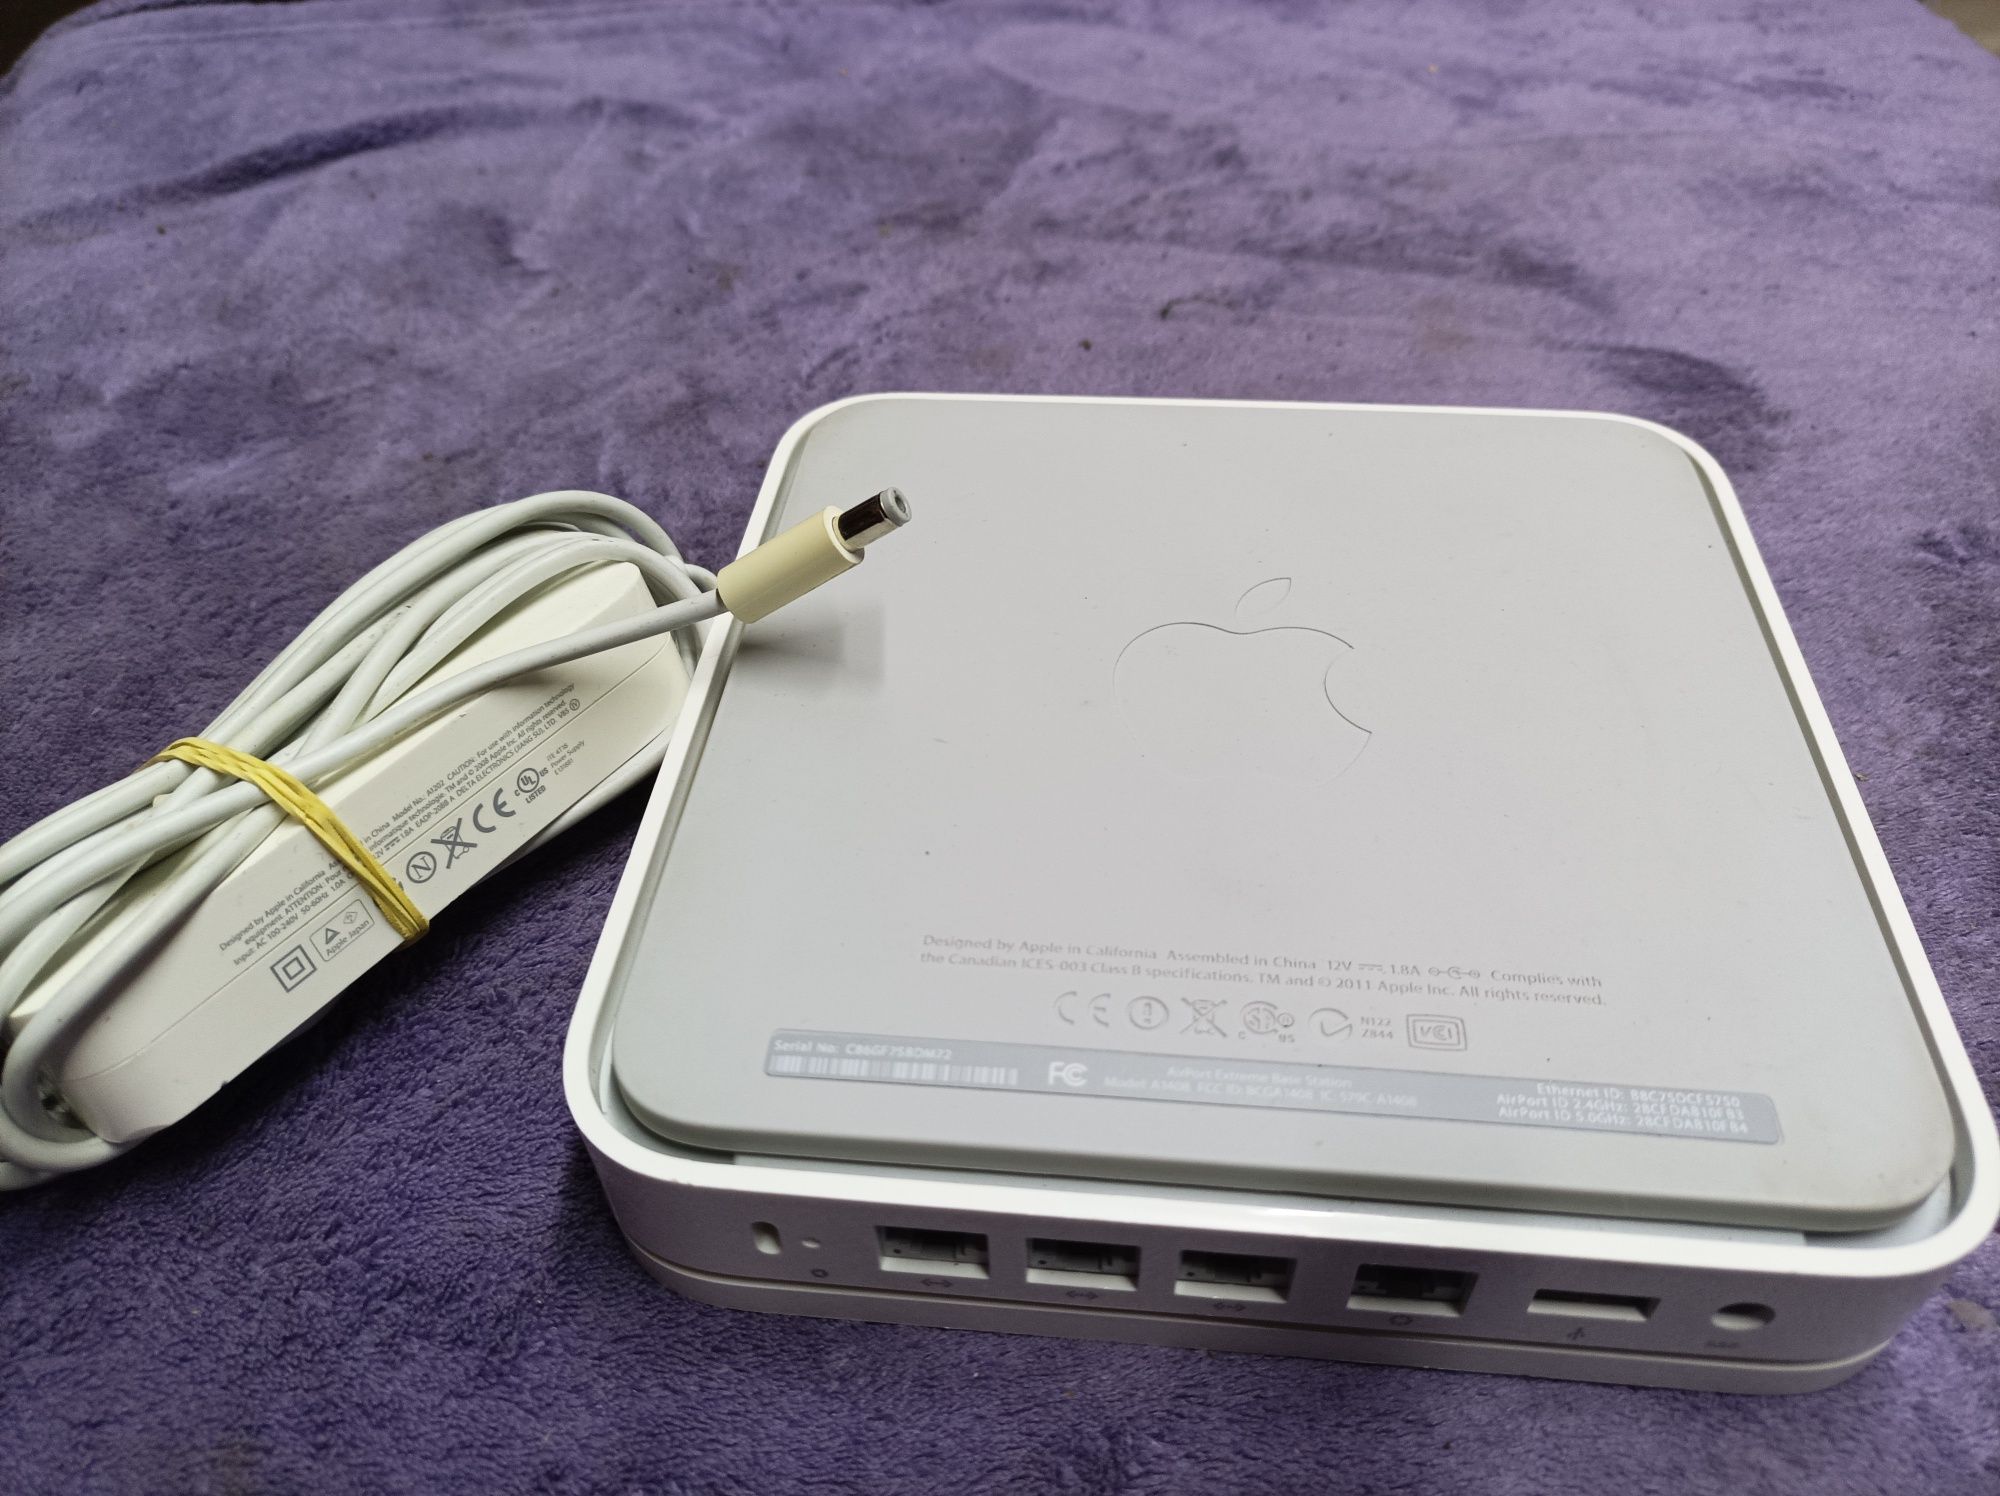 Router wifi Apple Extreme 802.11n. mod.A1408. Tanio!